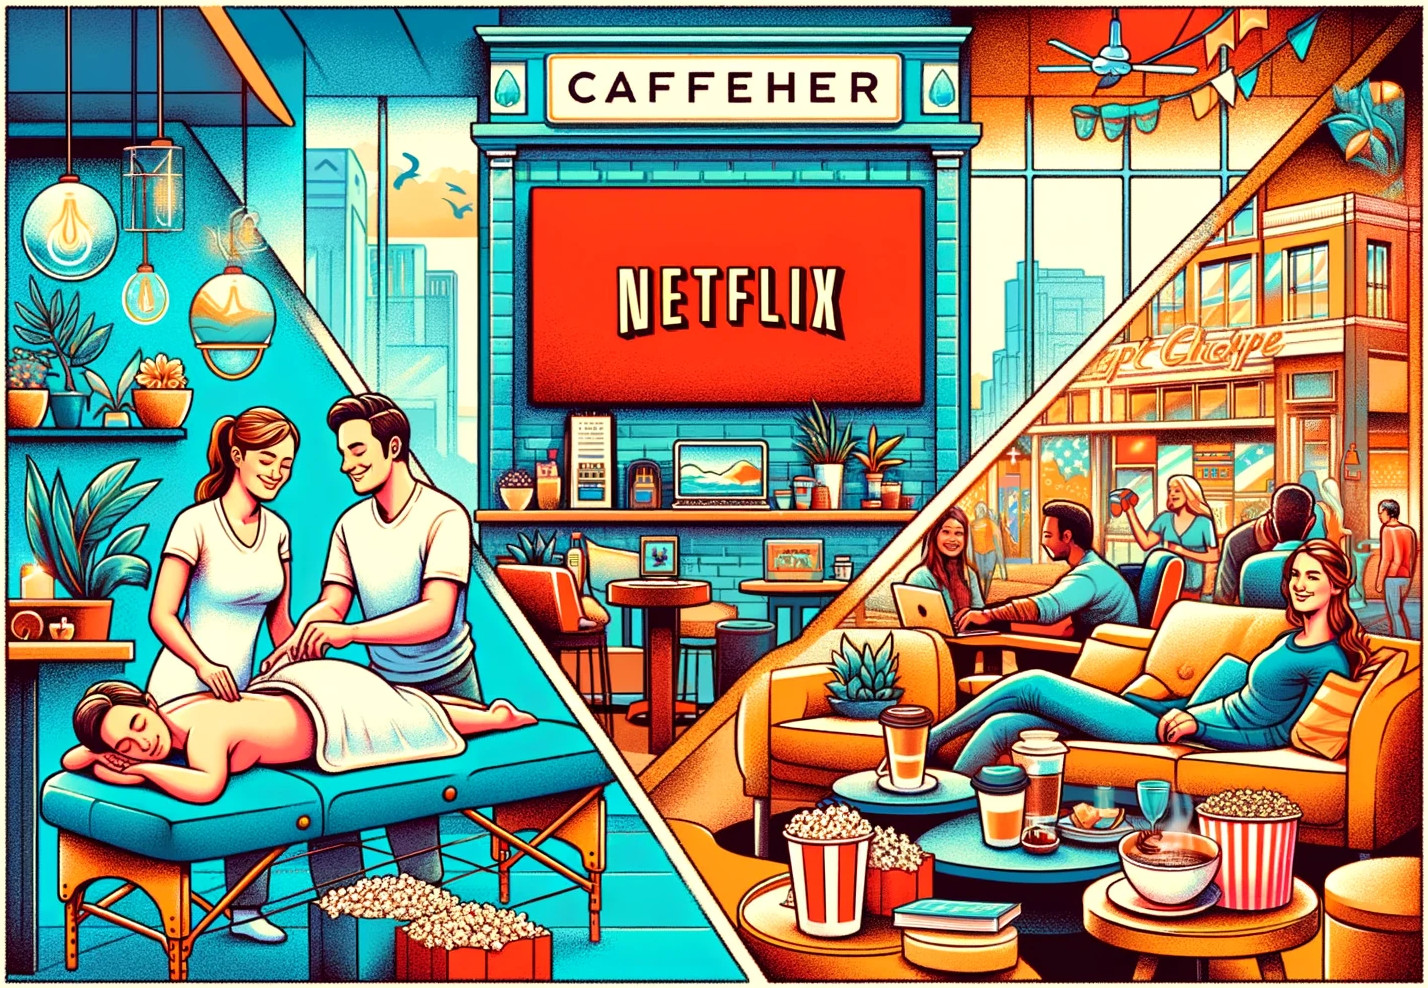 What Do a Massage Parlor, Coffee Shop, and Netflix Have in Common?